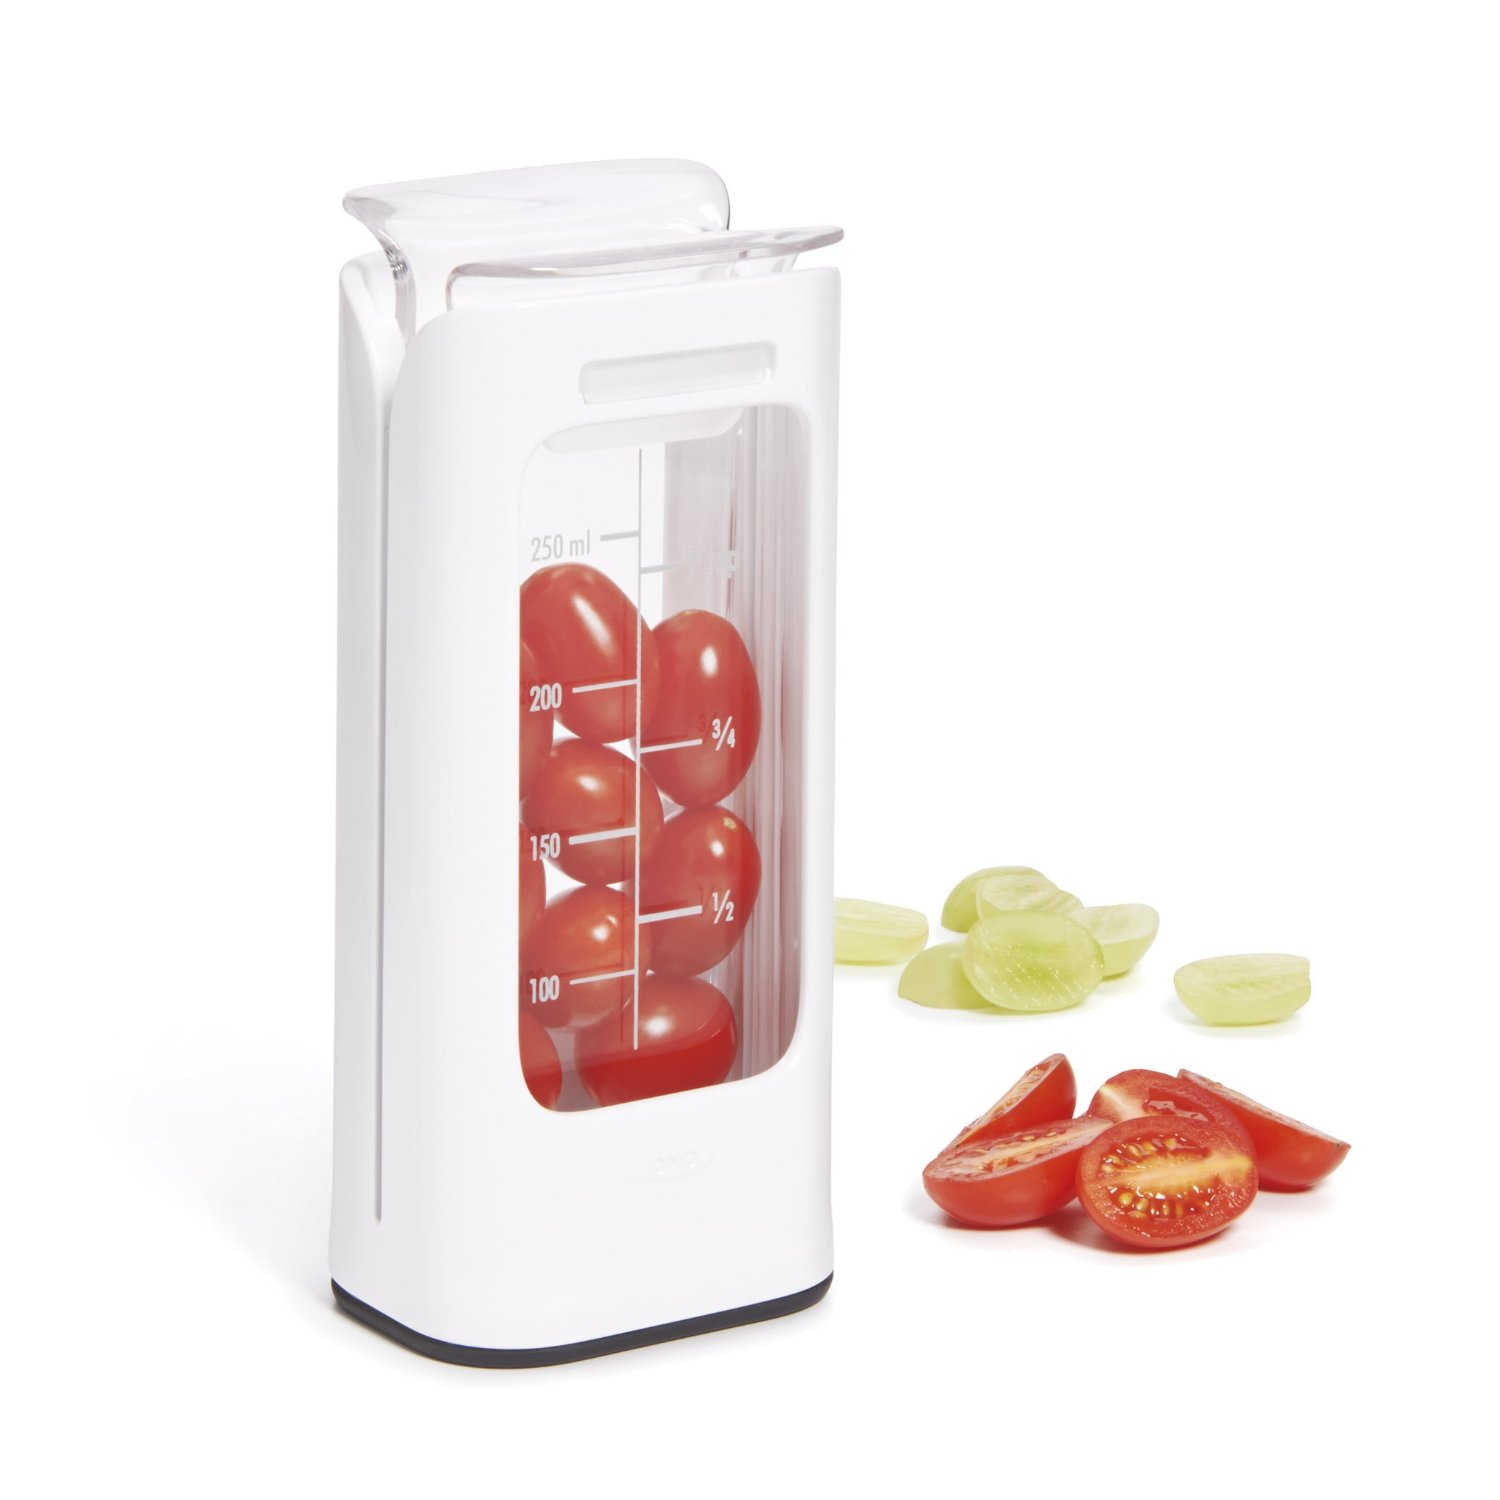 OXO Good Grips Grape and Tomato Slicer & Cutter kitchen gadget